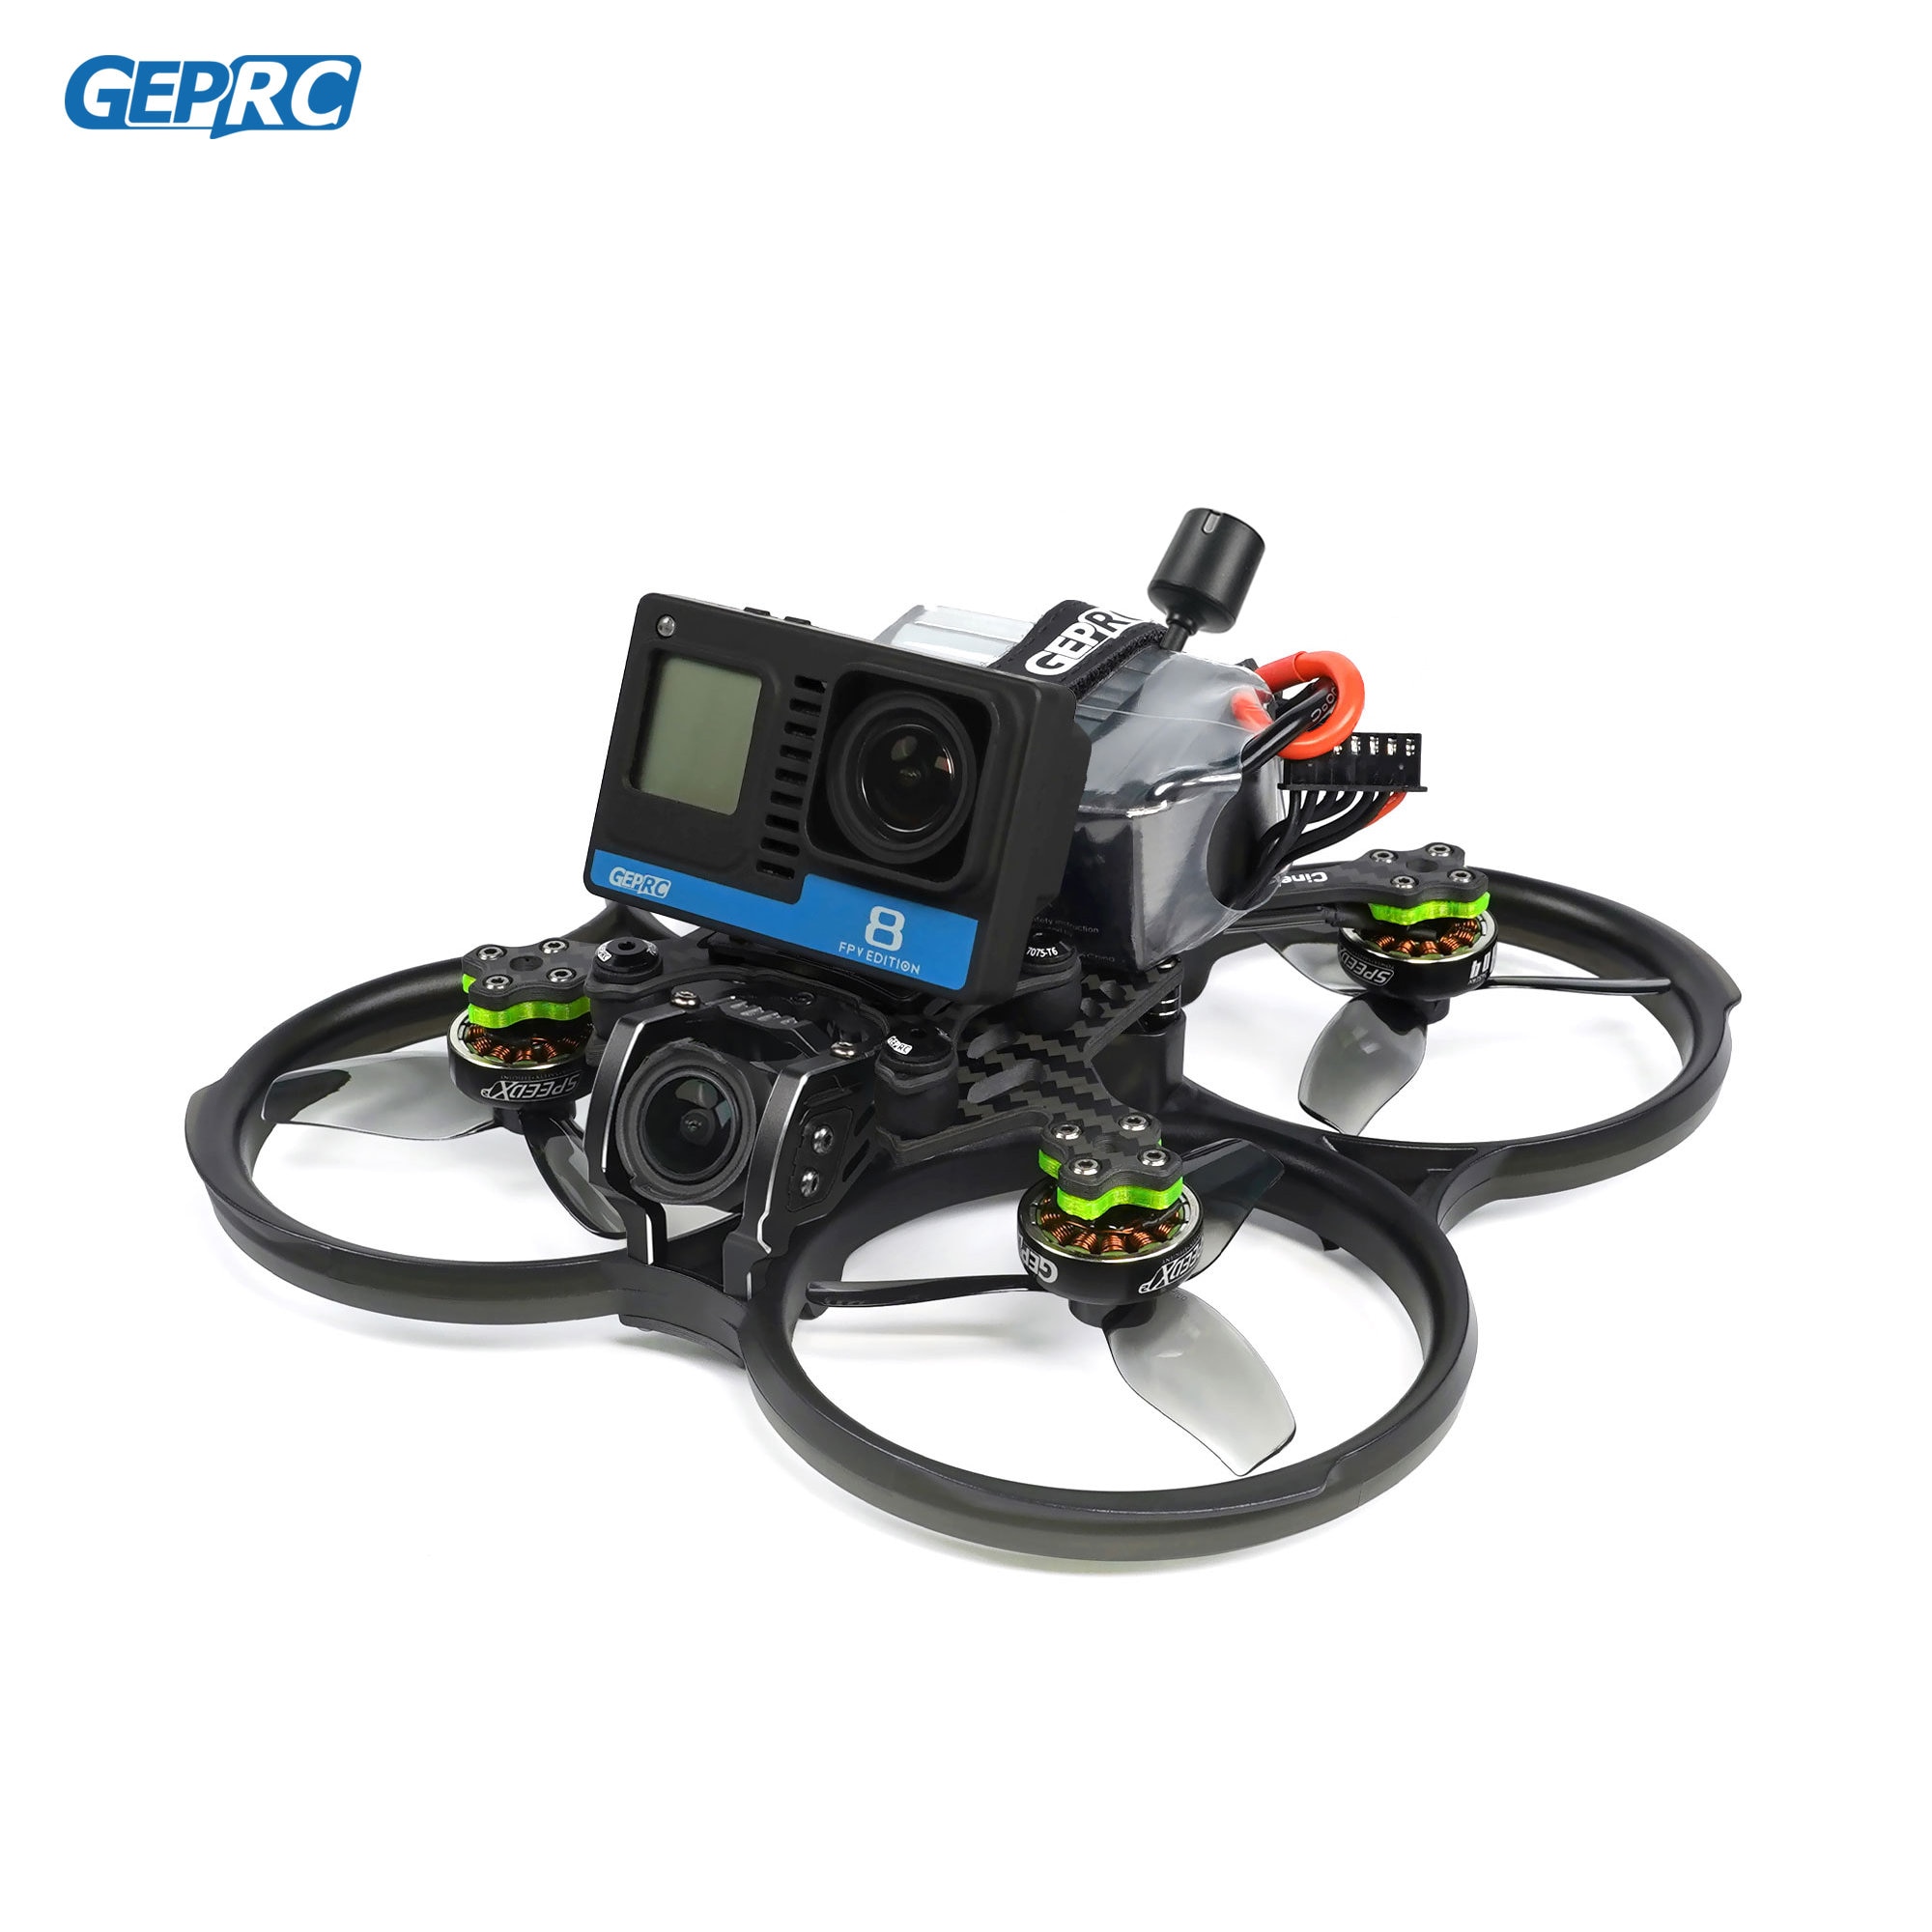 GEPRC Cinebot30 HD O3 FPV Quadcopter